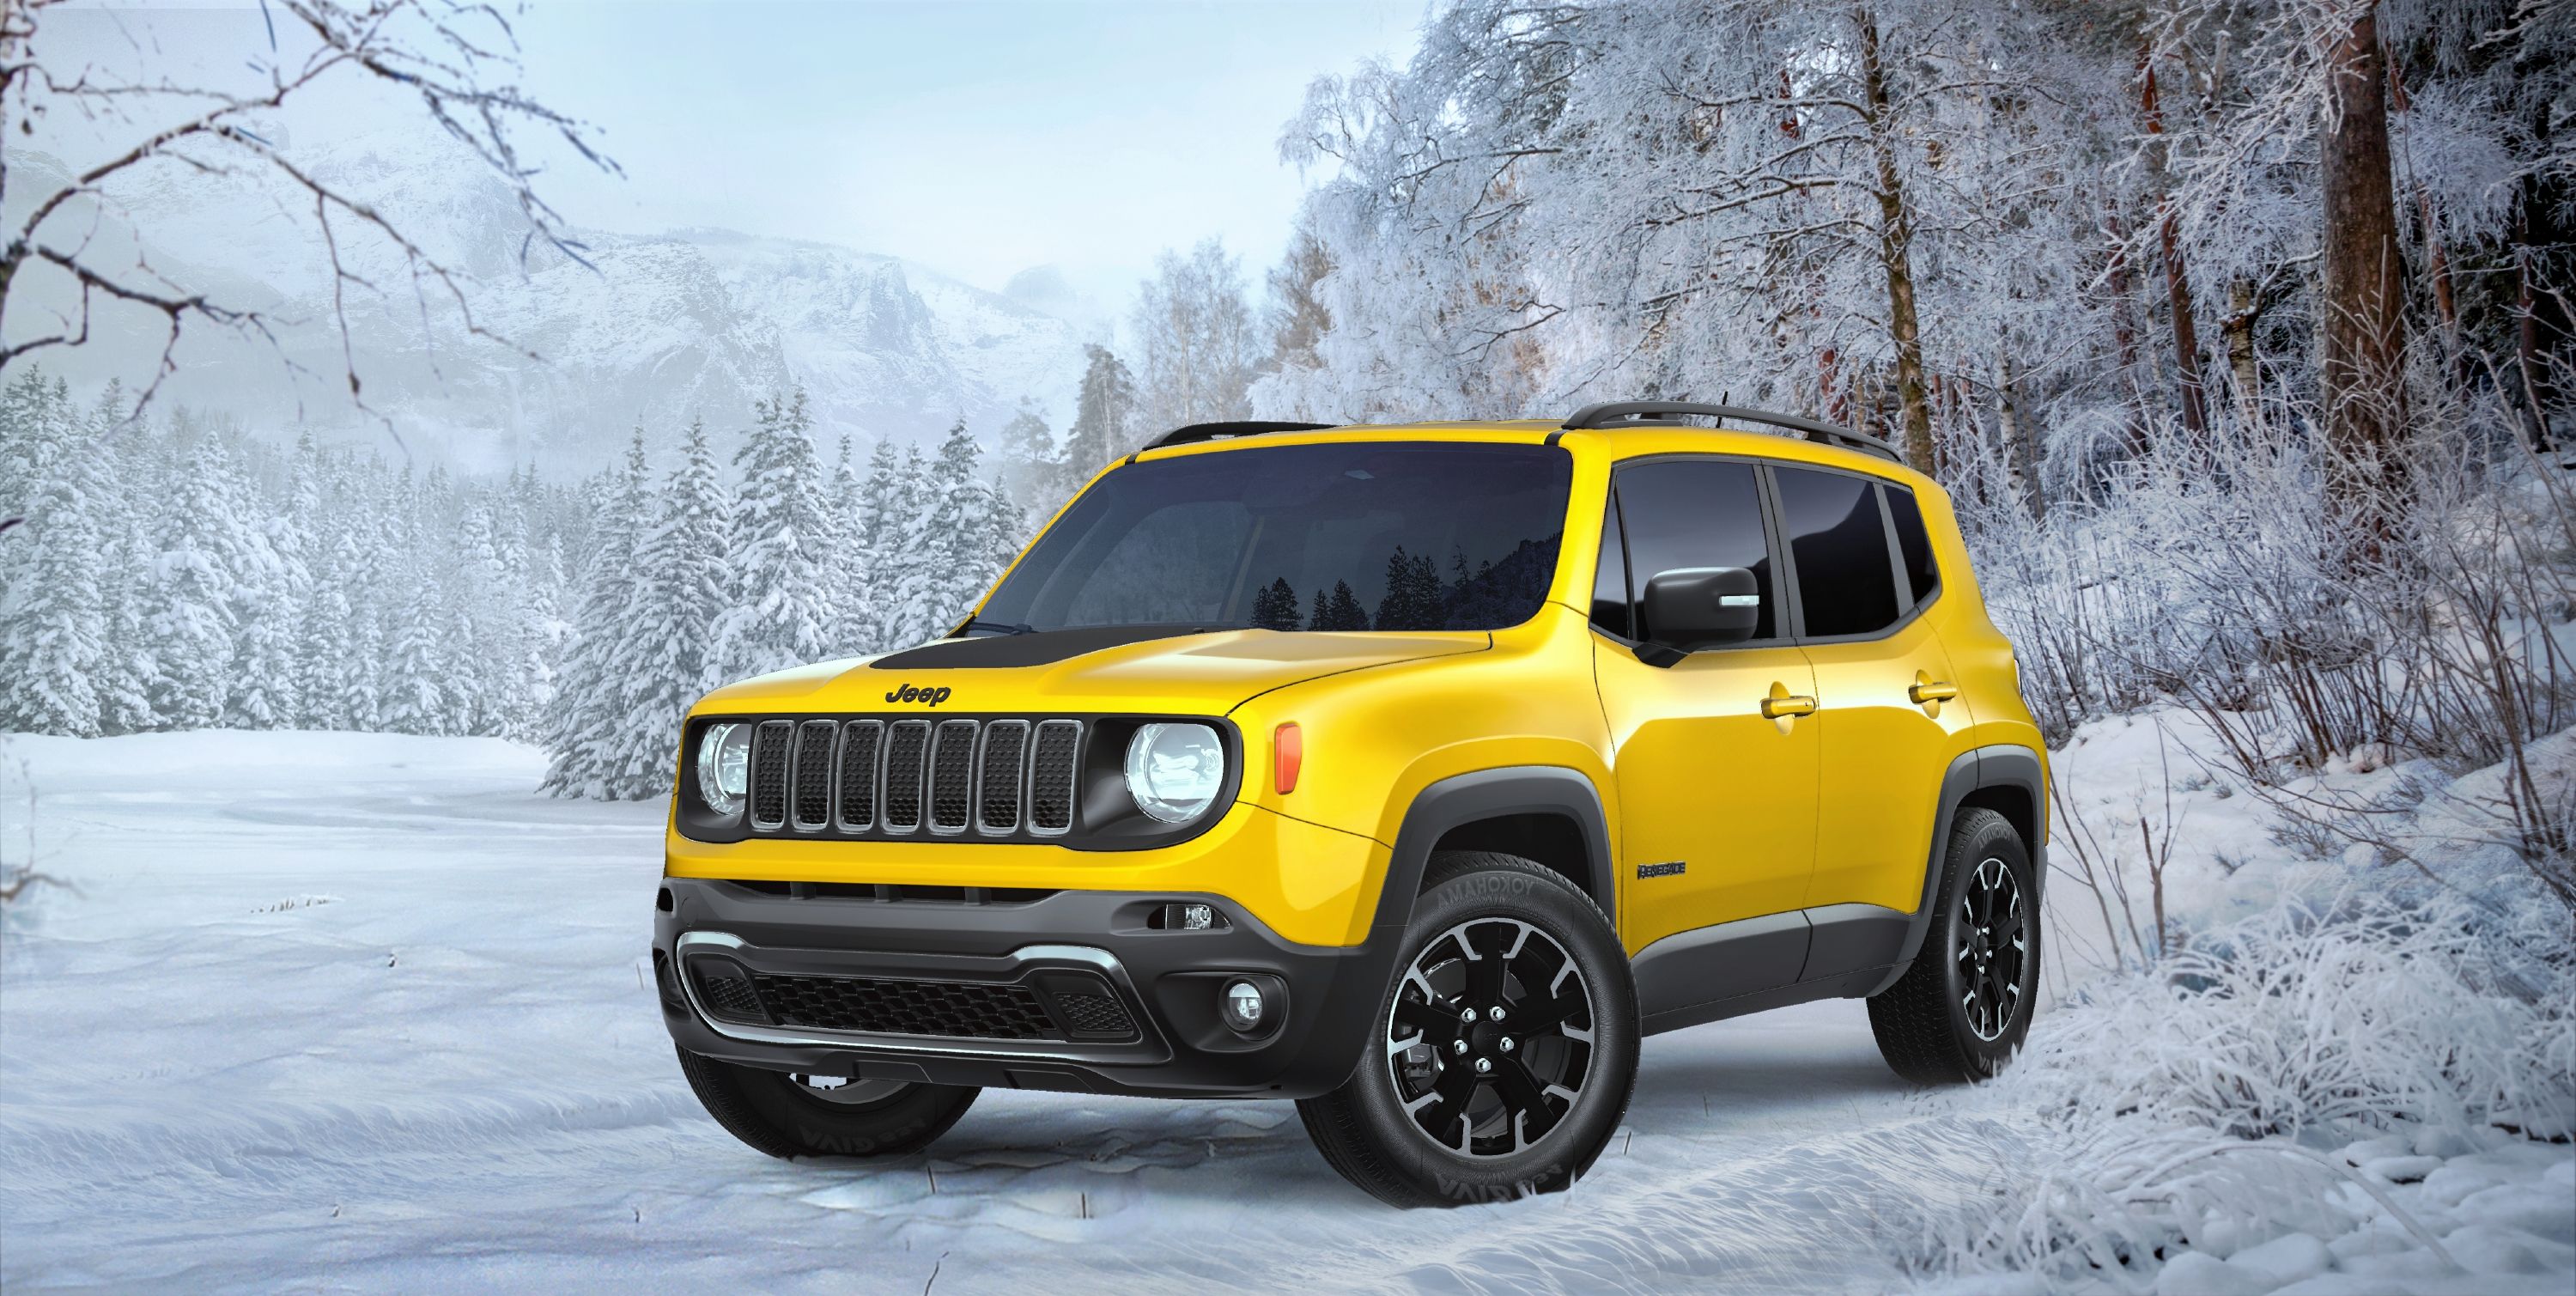 Jeep Renegade - Creta Rival Is A Missed Opportunity